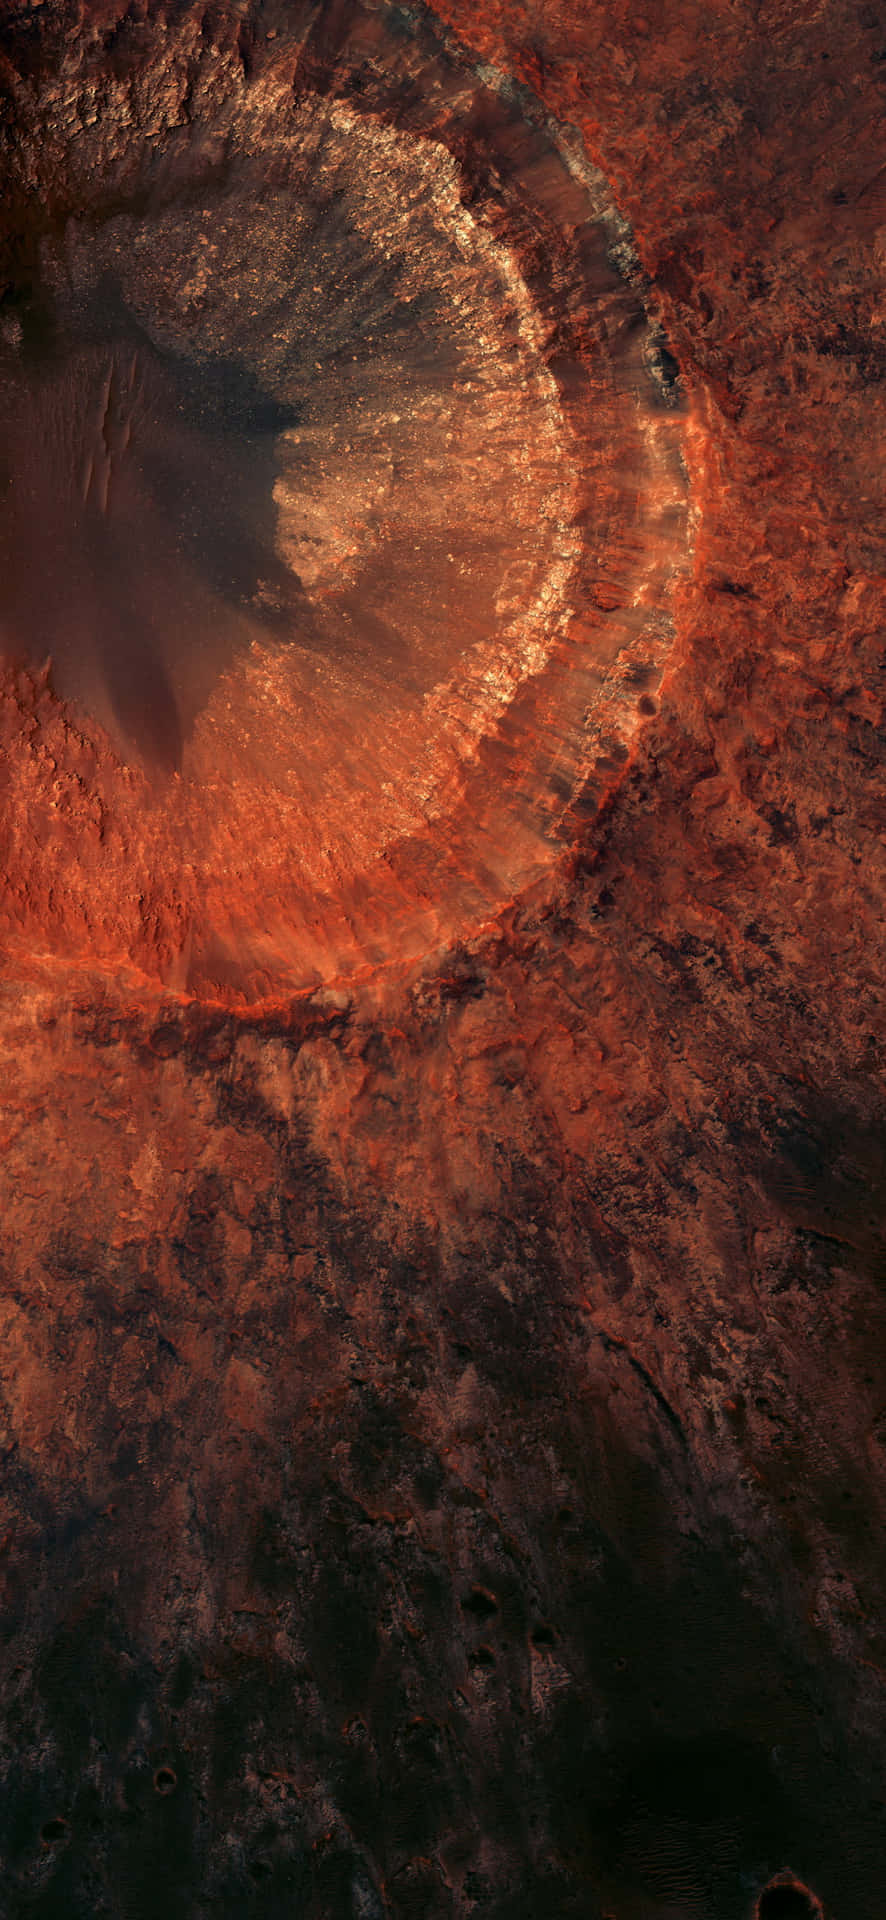 Mars Landscape: Intriguing Red Planet Surface Wallpaper